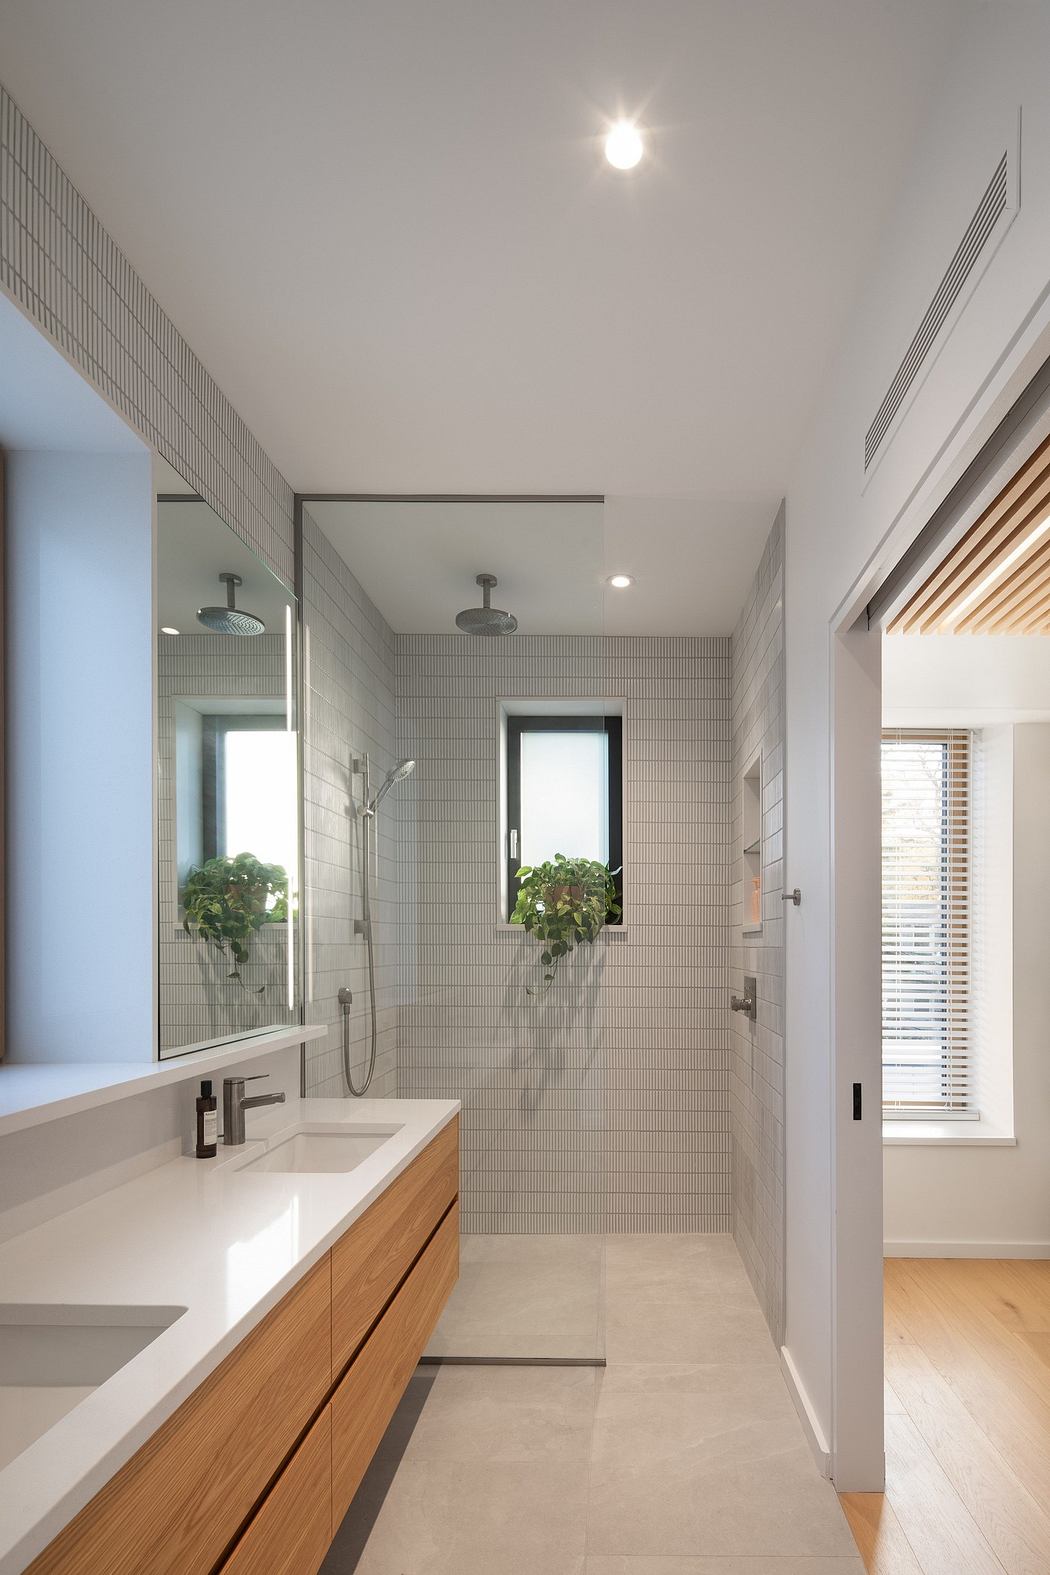 Sleek bathroom interior with glass shower and wooden accents.